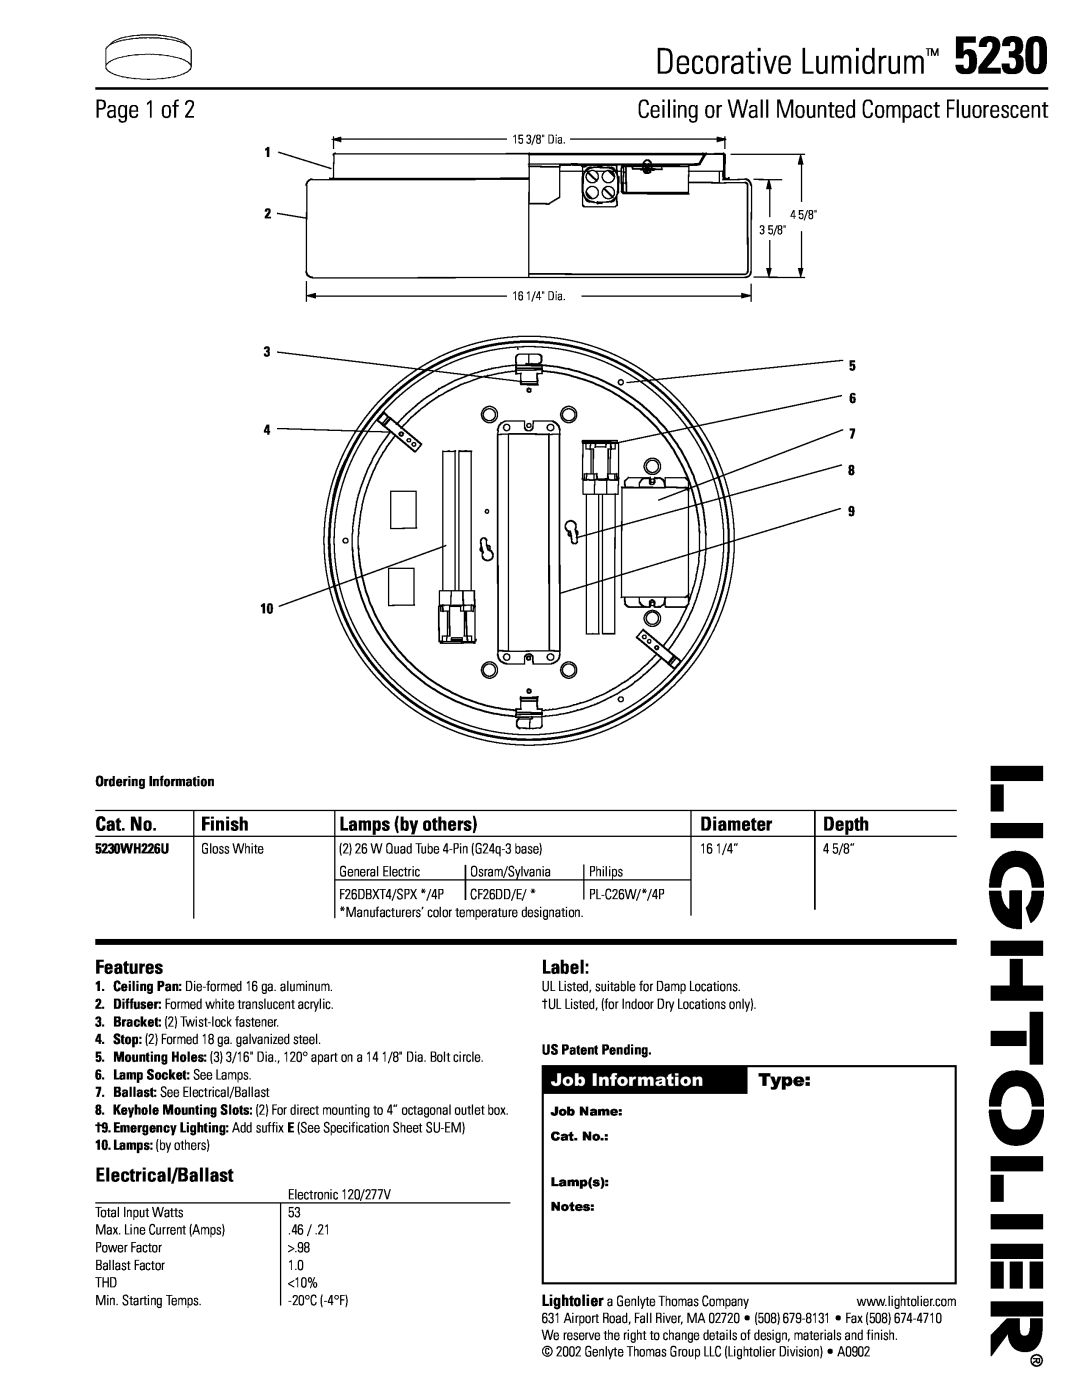 Lightolier 5230 specifications Ceiling or Wall Mounted Compact Fluorescent, Page 1 of, Job Information, Type, 5 6, Cat. No 